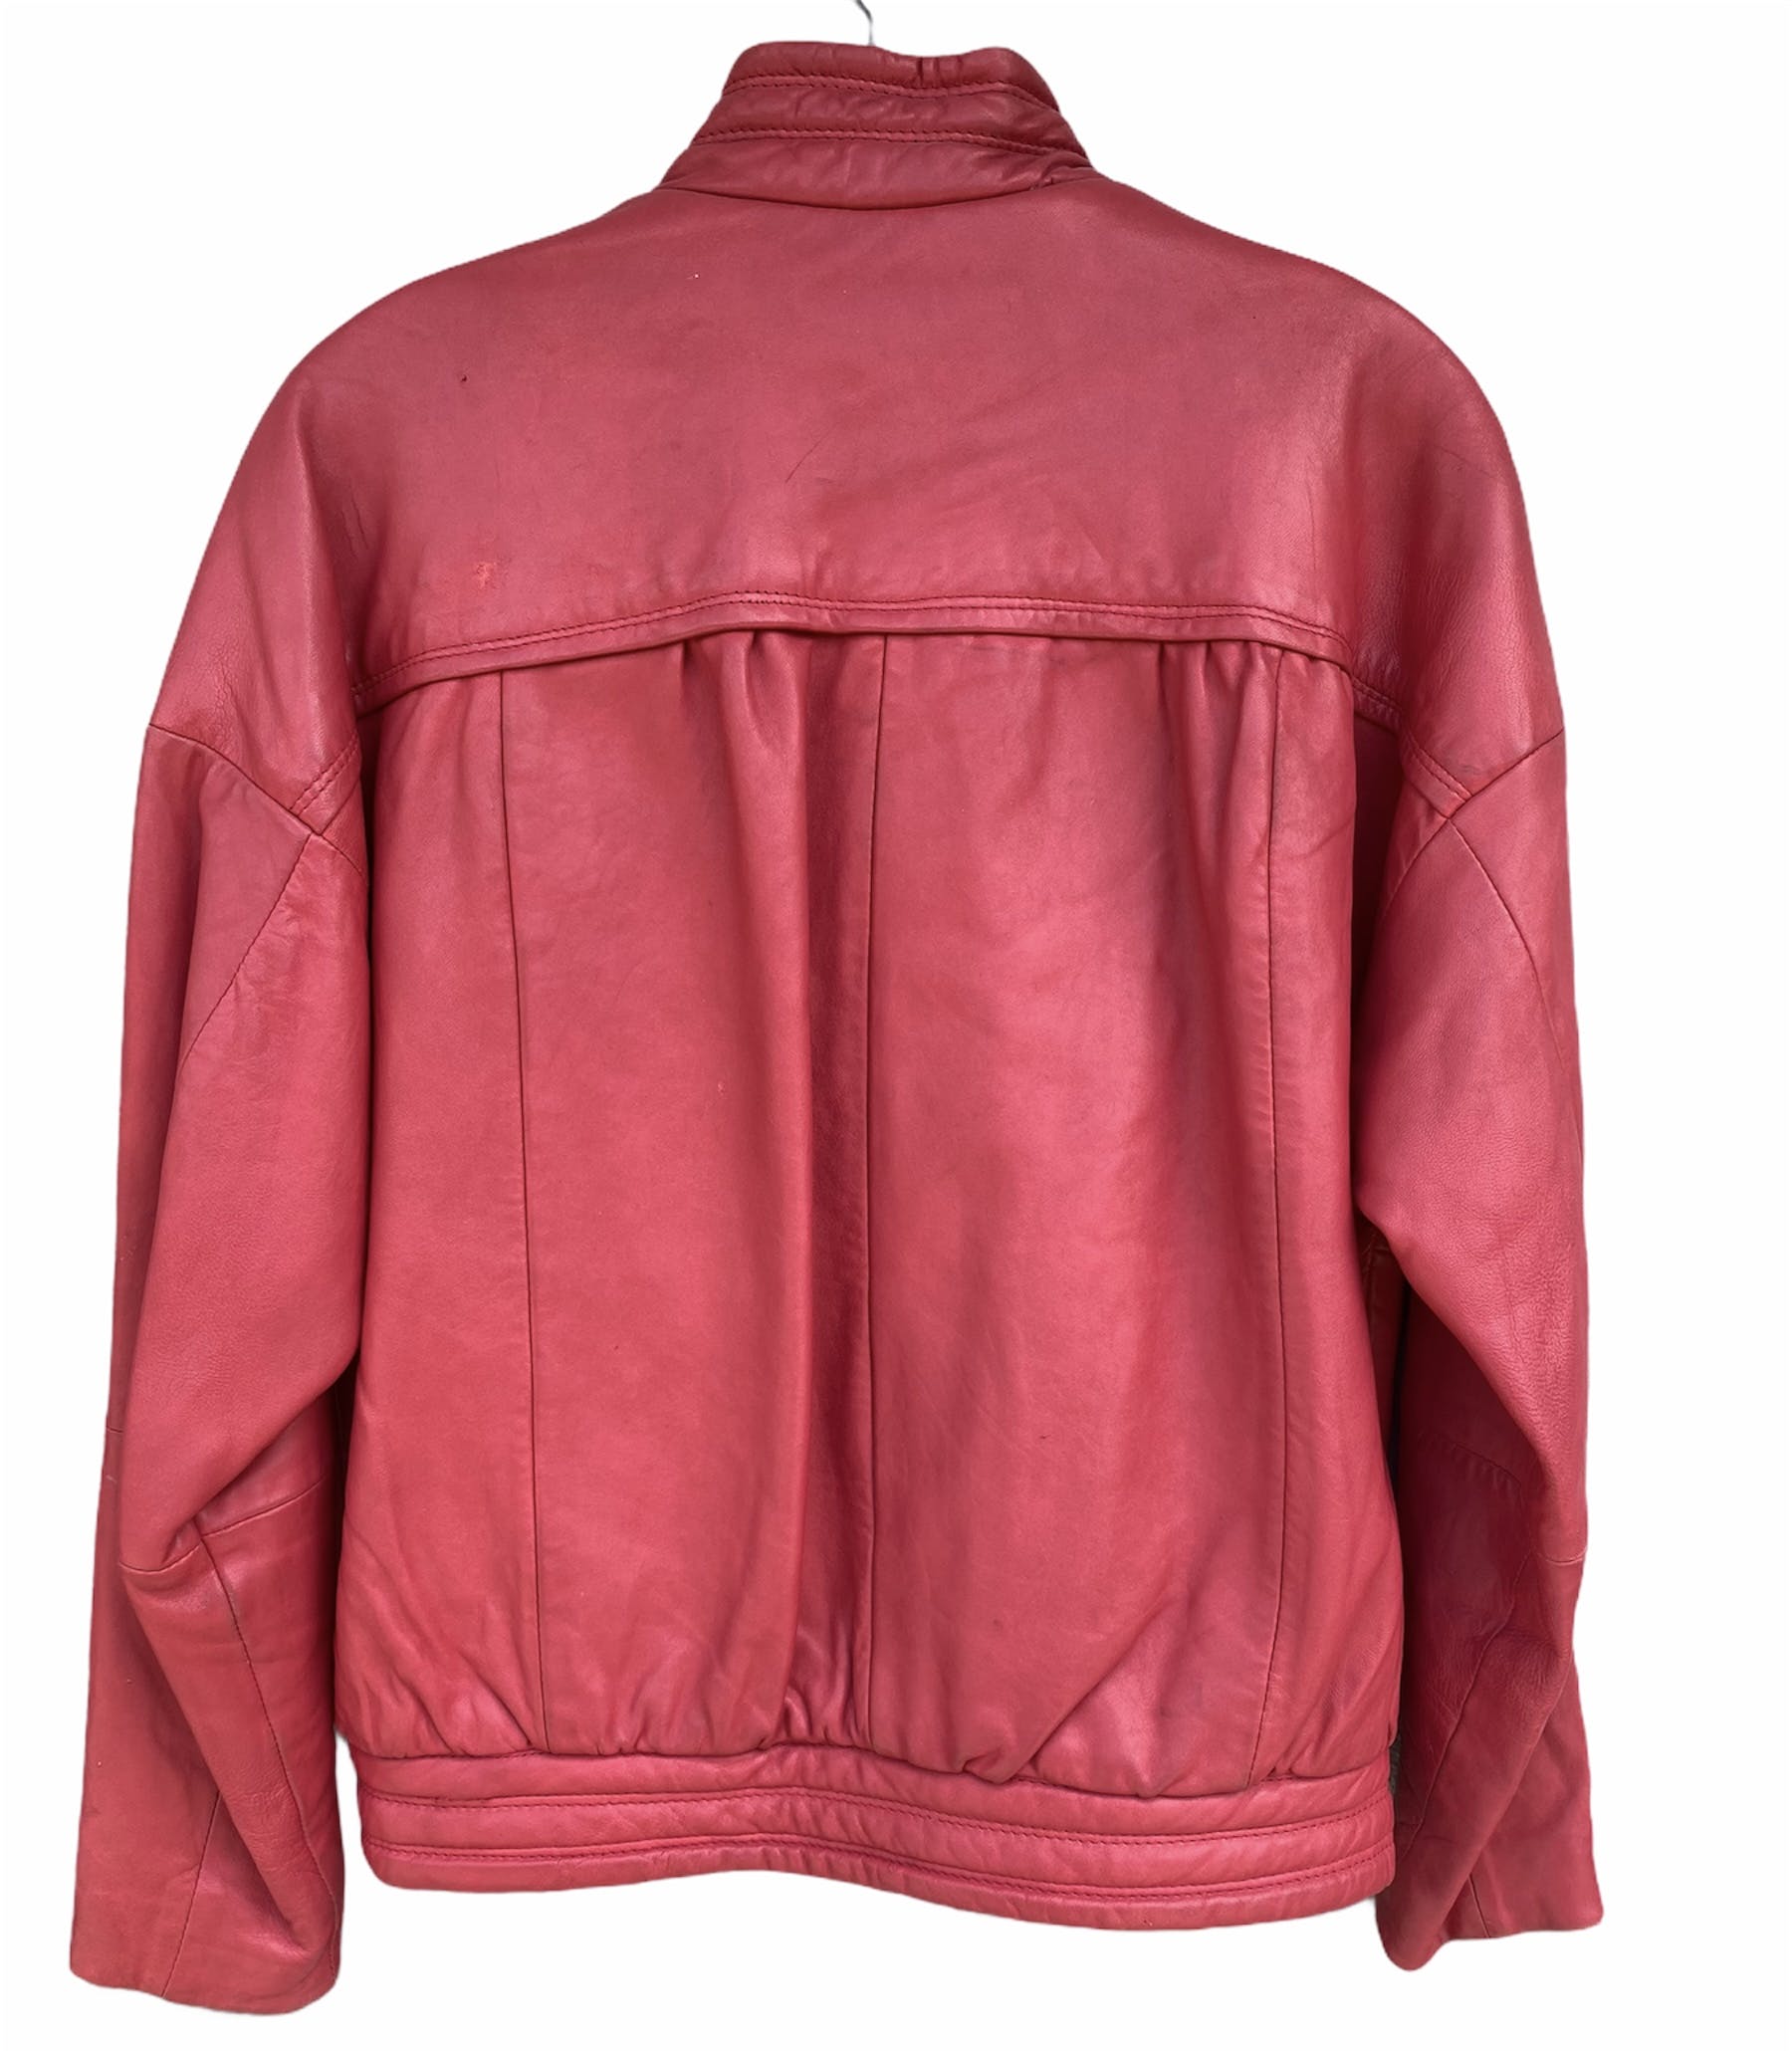 Vintage Red Butter Leather Jacket by Pour Le Sport | Shop THRILLING